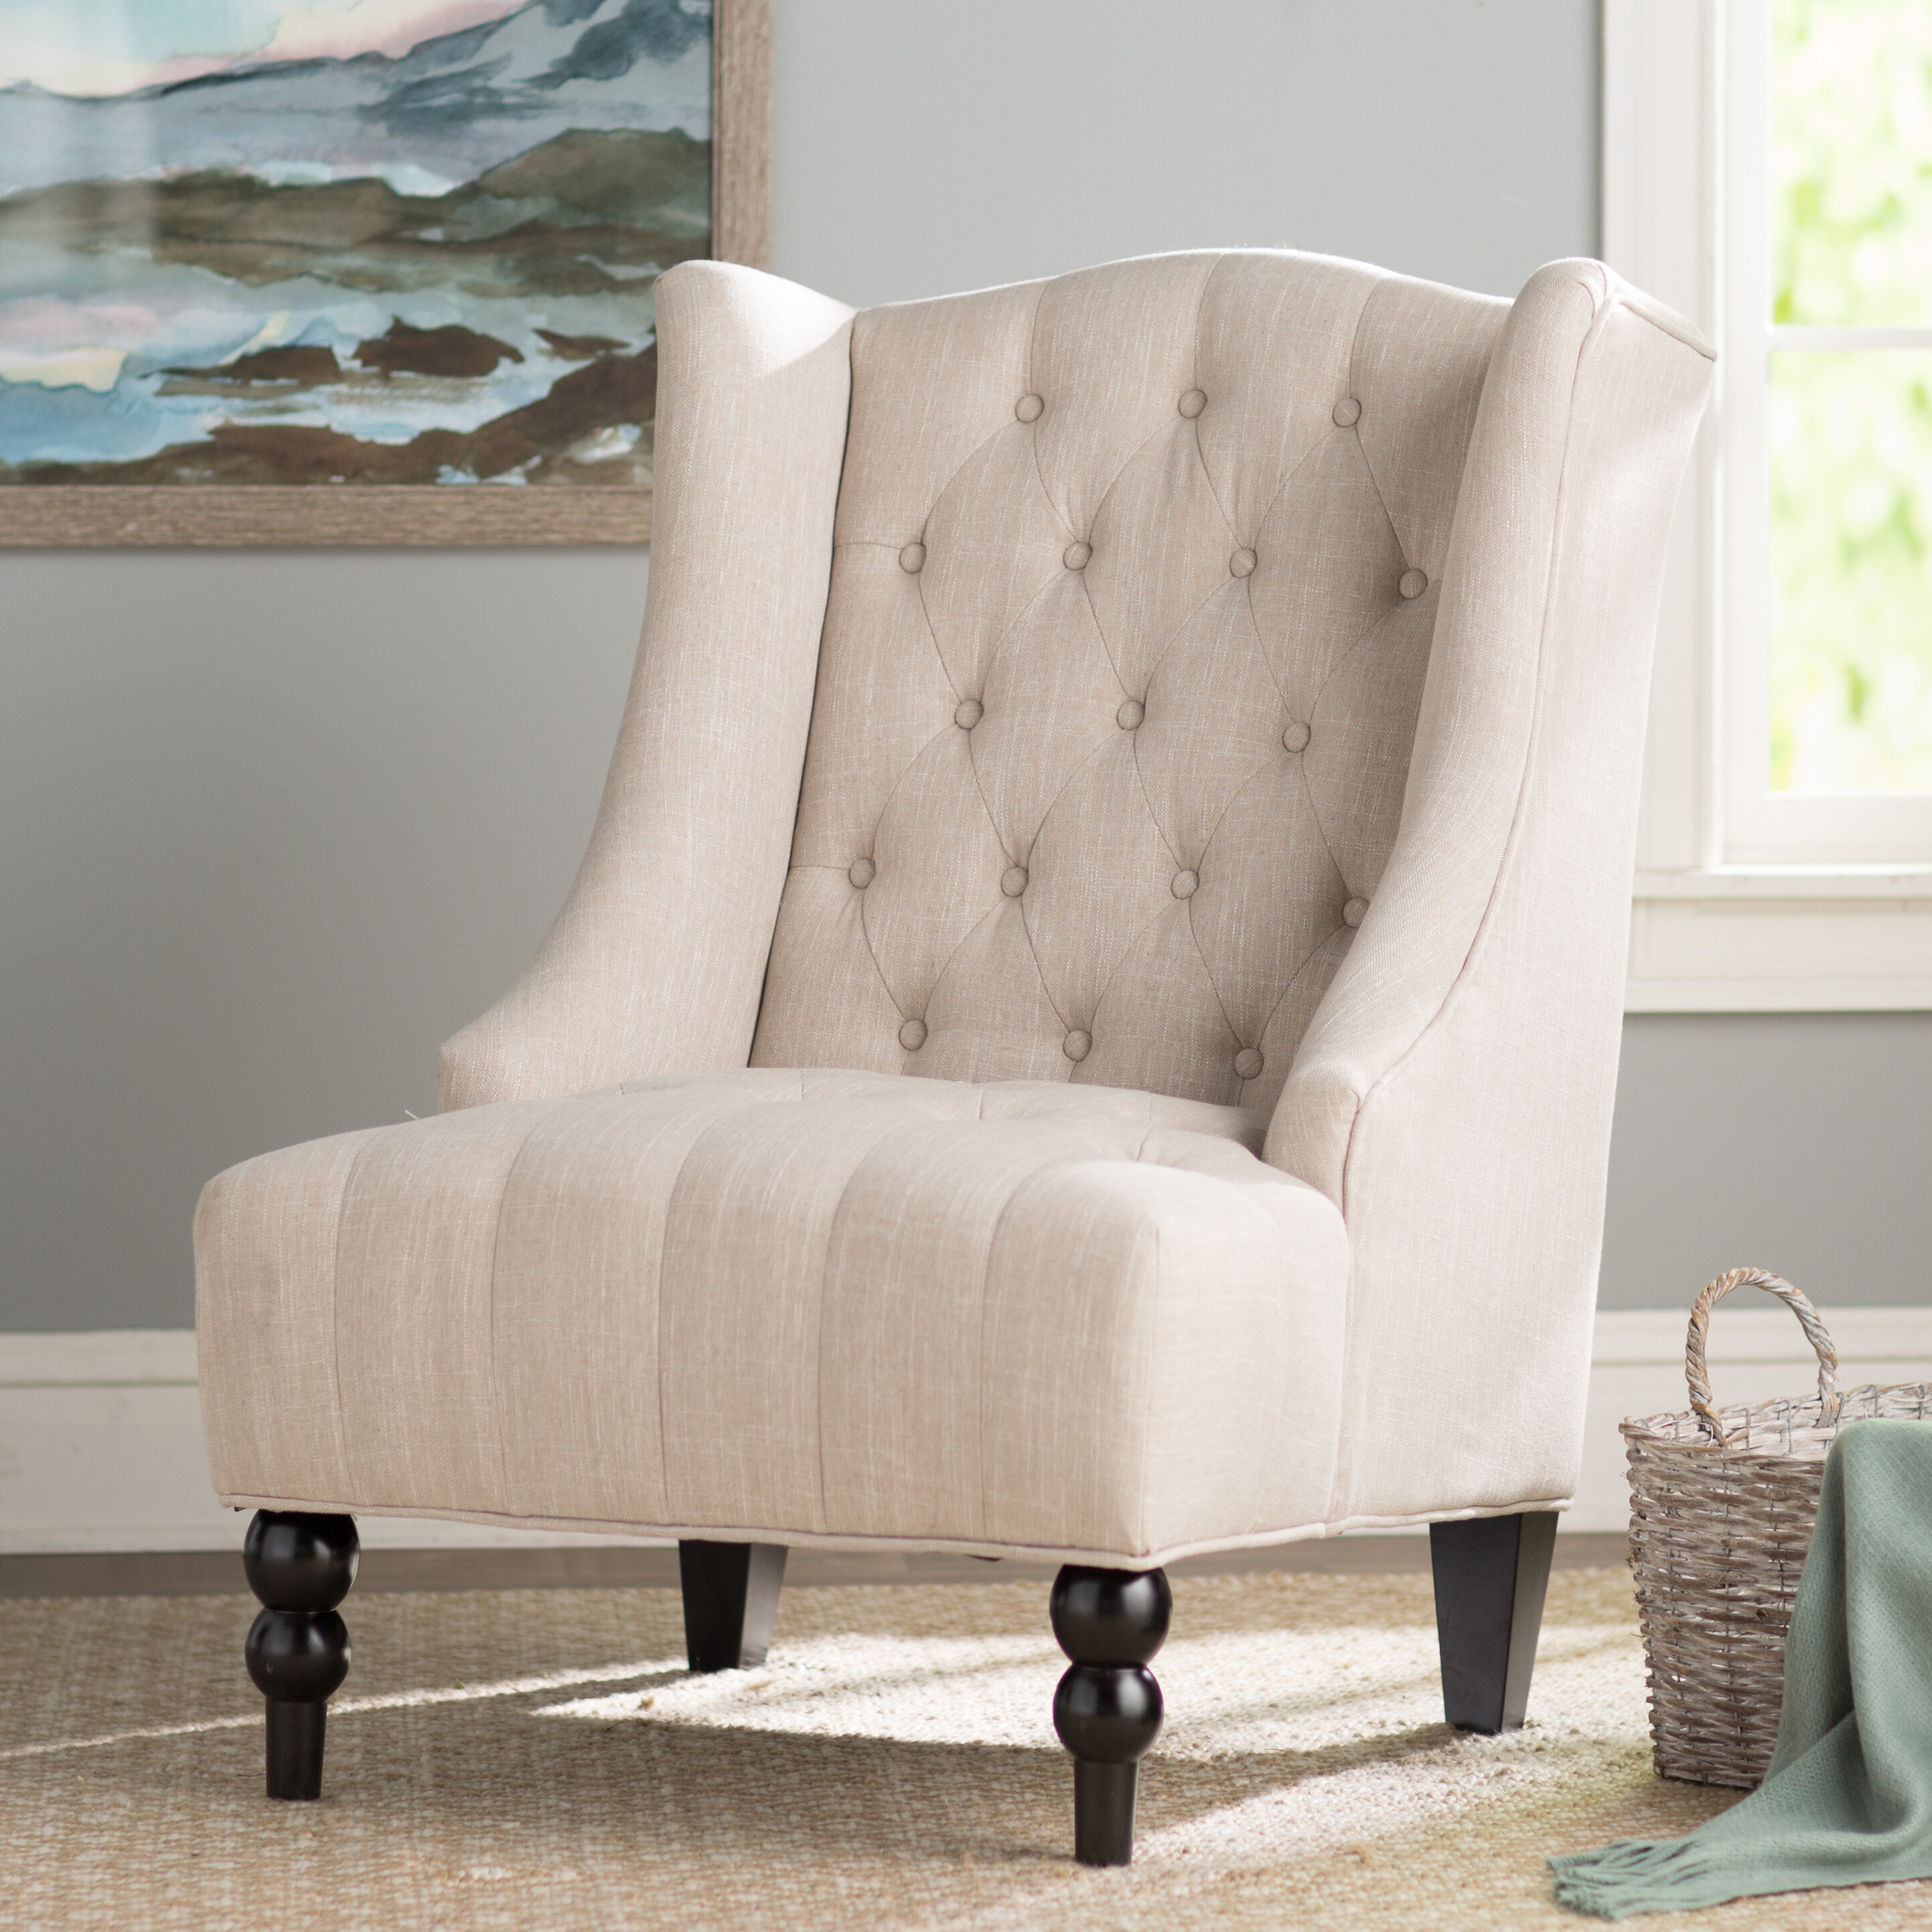 Danni-Lee 27.6” Wide Tufted Wingback Chair